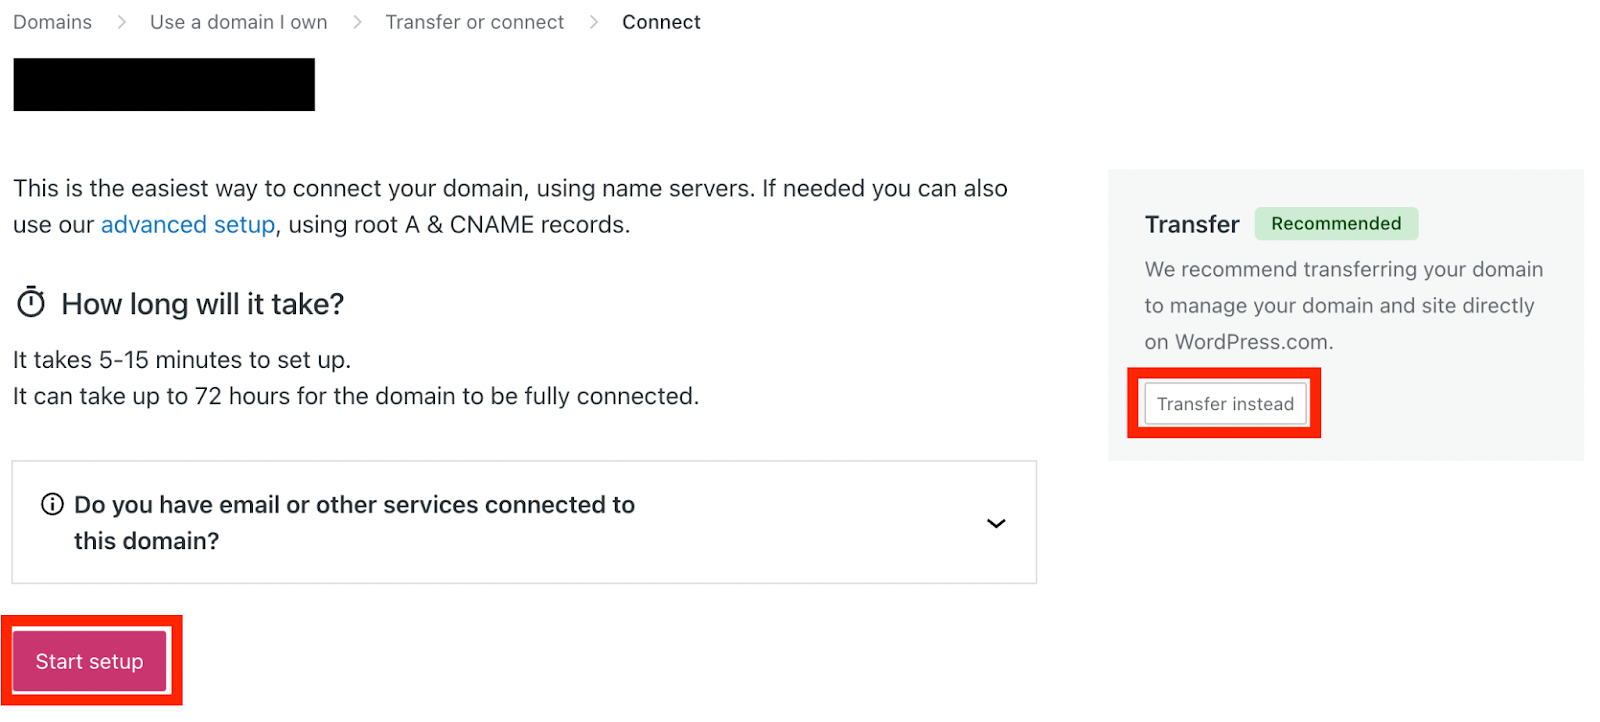 Transfer your domain